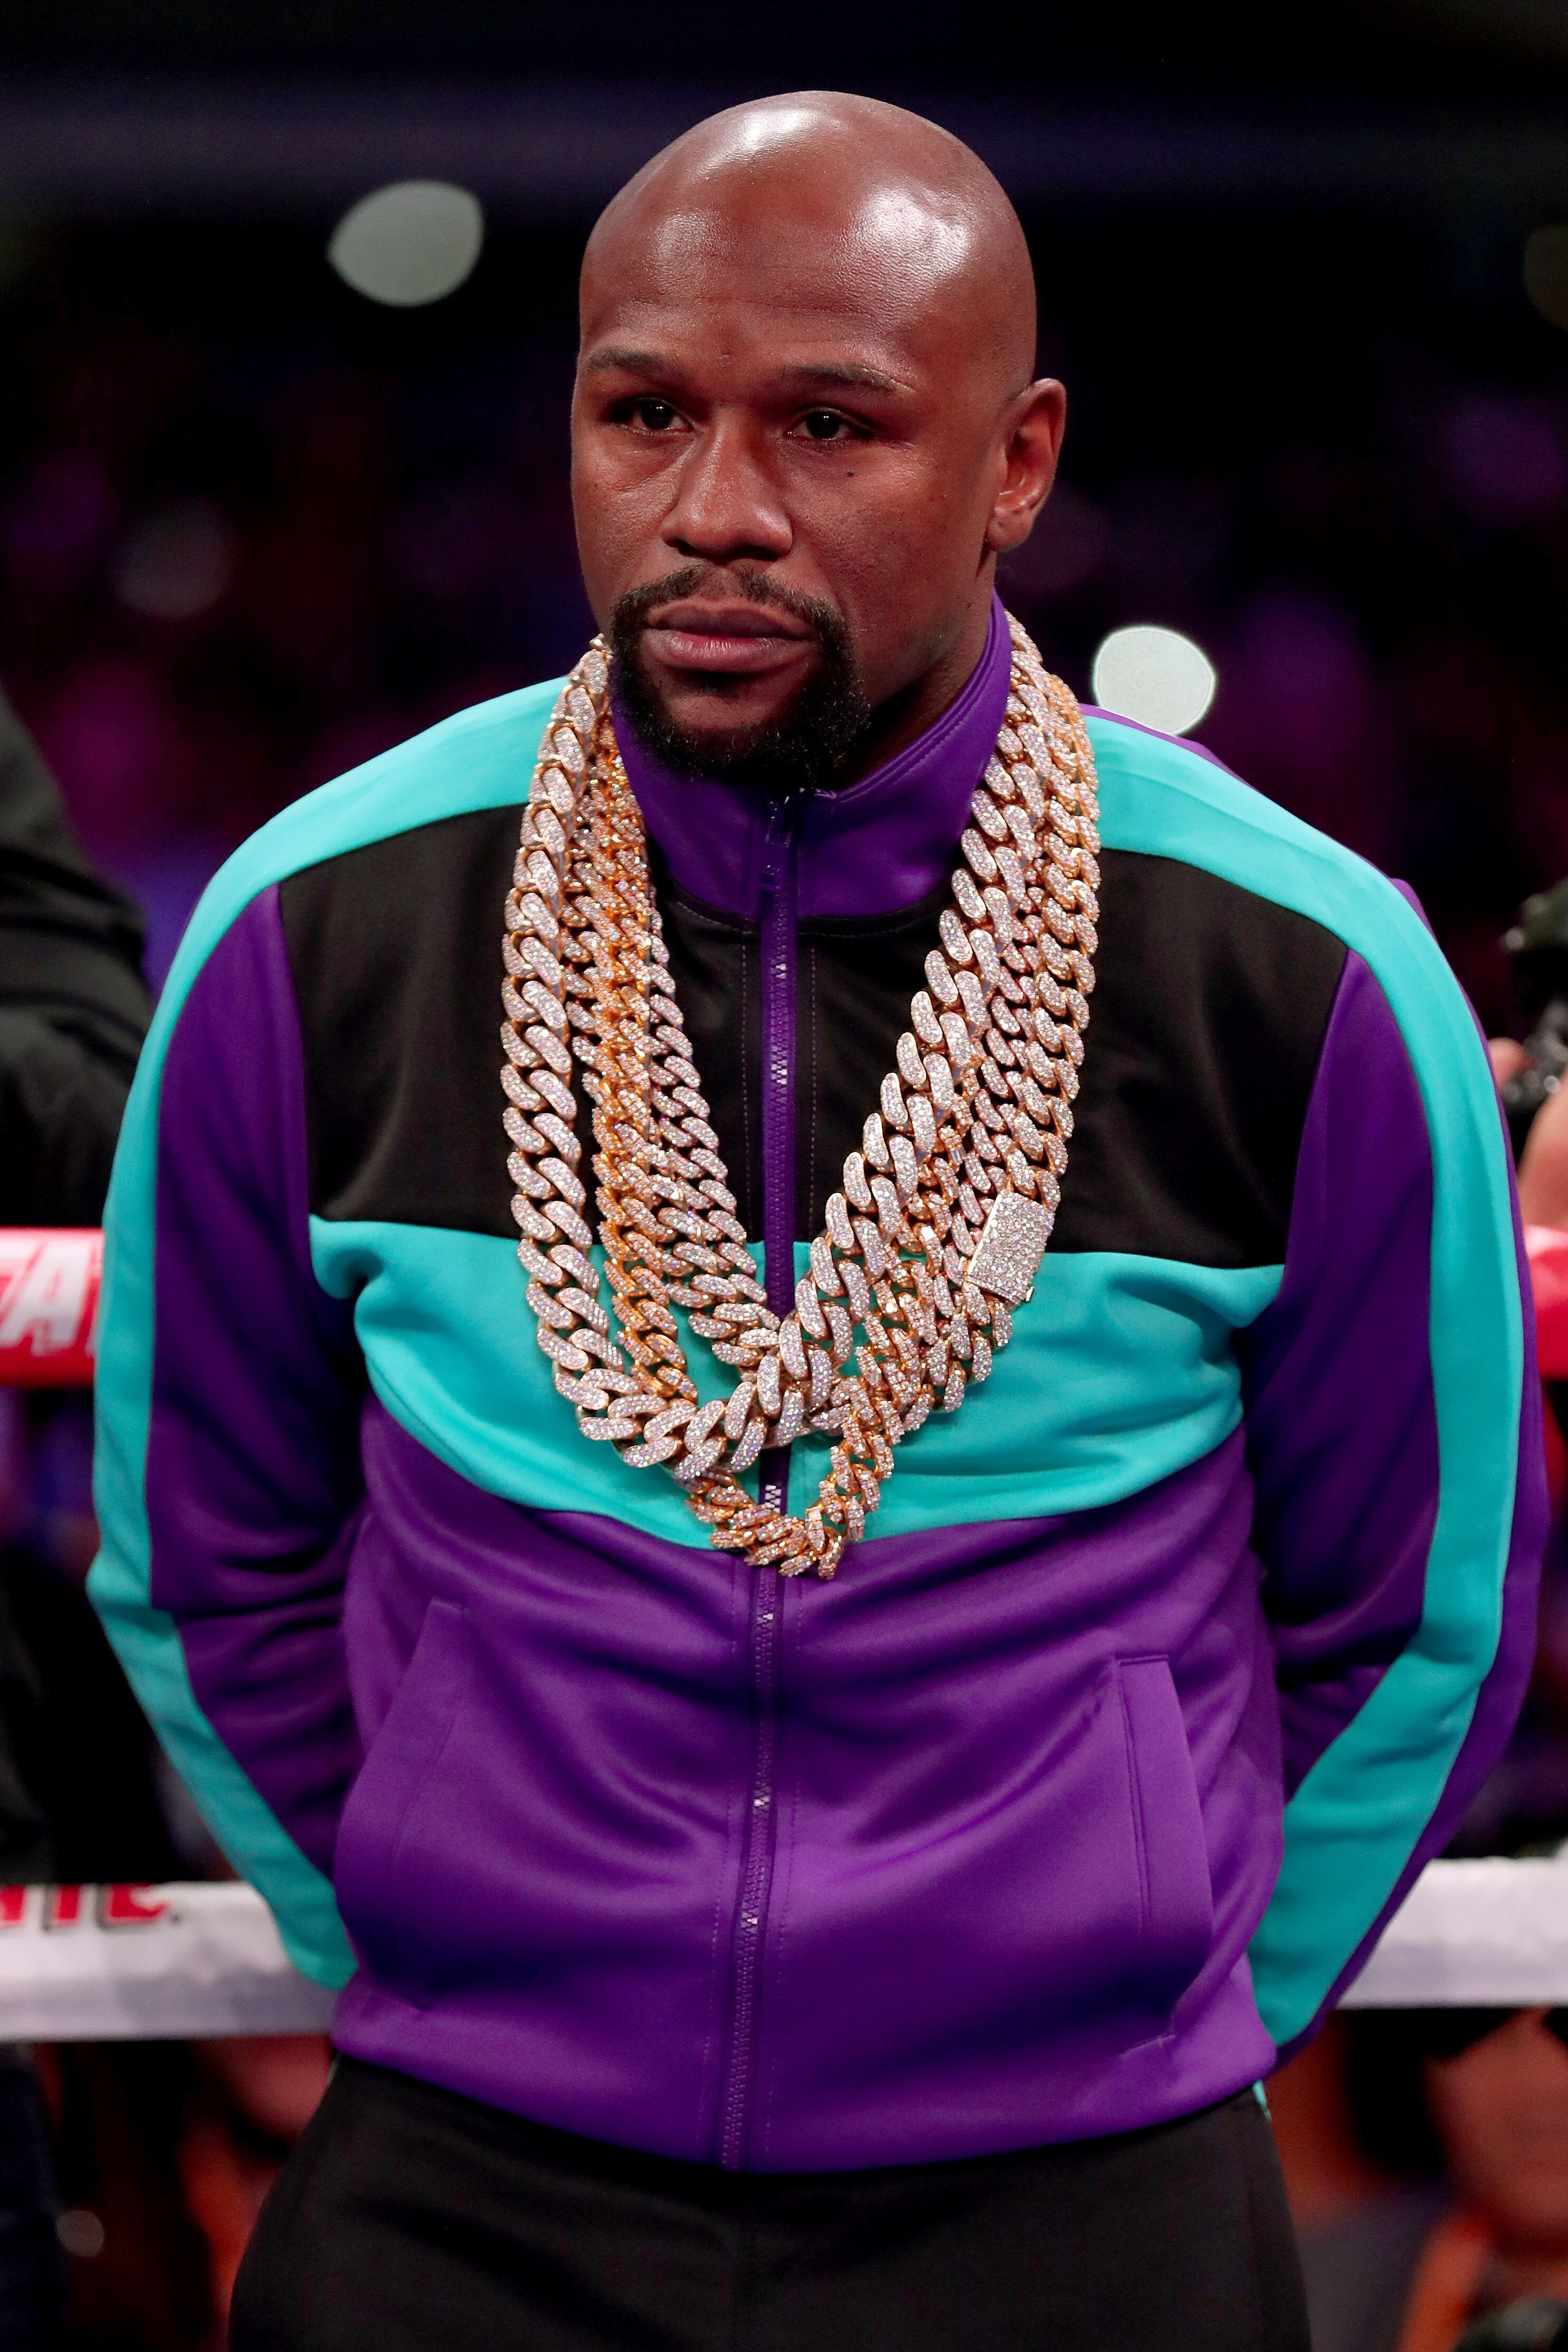 Floyd Mayweather Jr. stands in the ring in an IBF World Welterweight Championship bout at AT&T Stadium on March 16, 2019 in Arlington, Texas. | Source: Getty Images